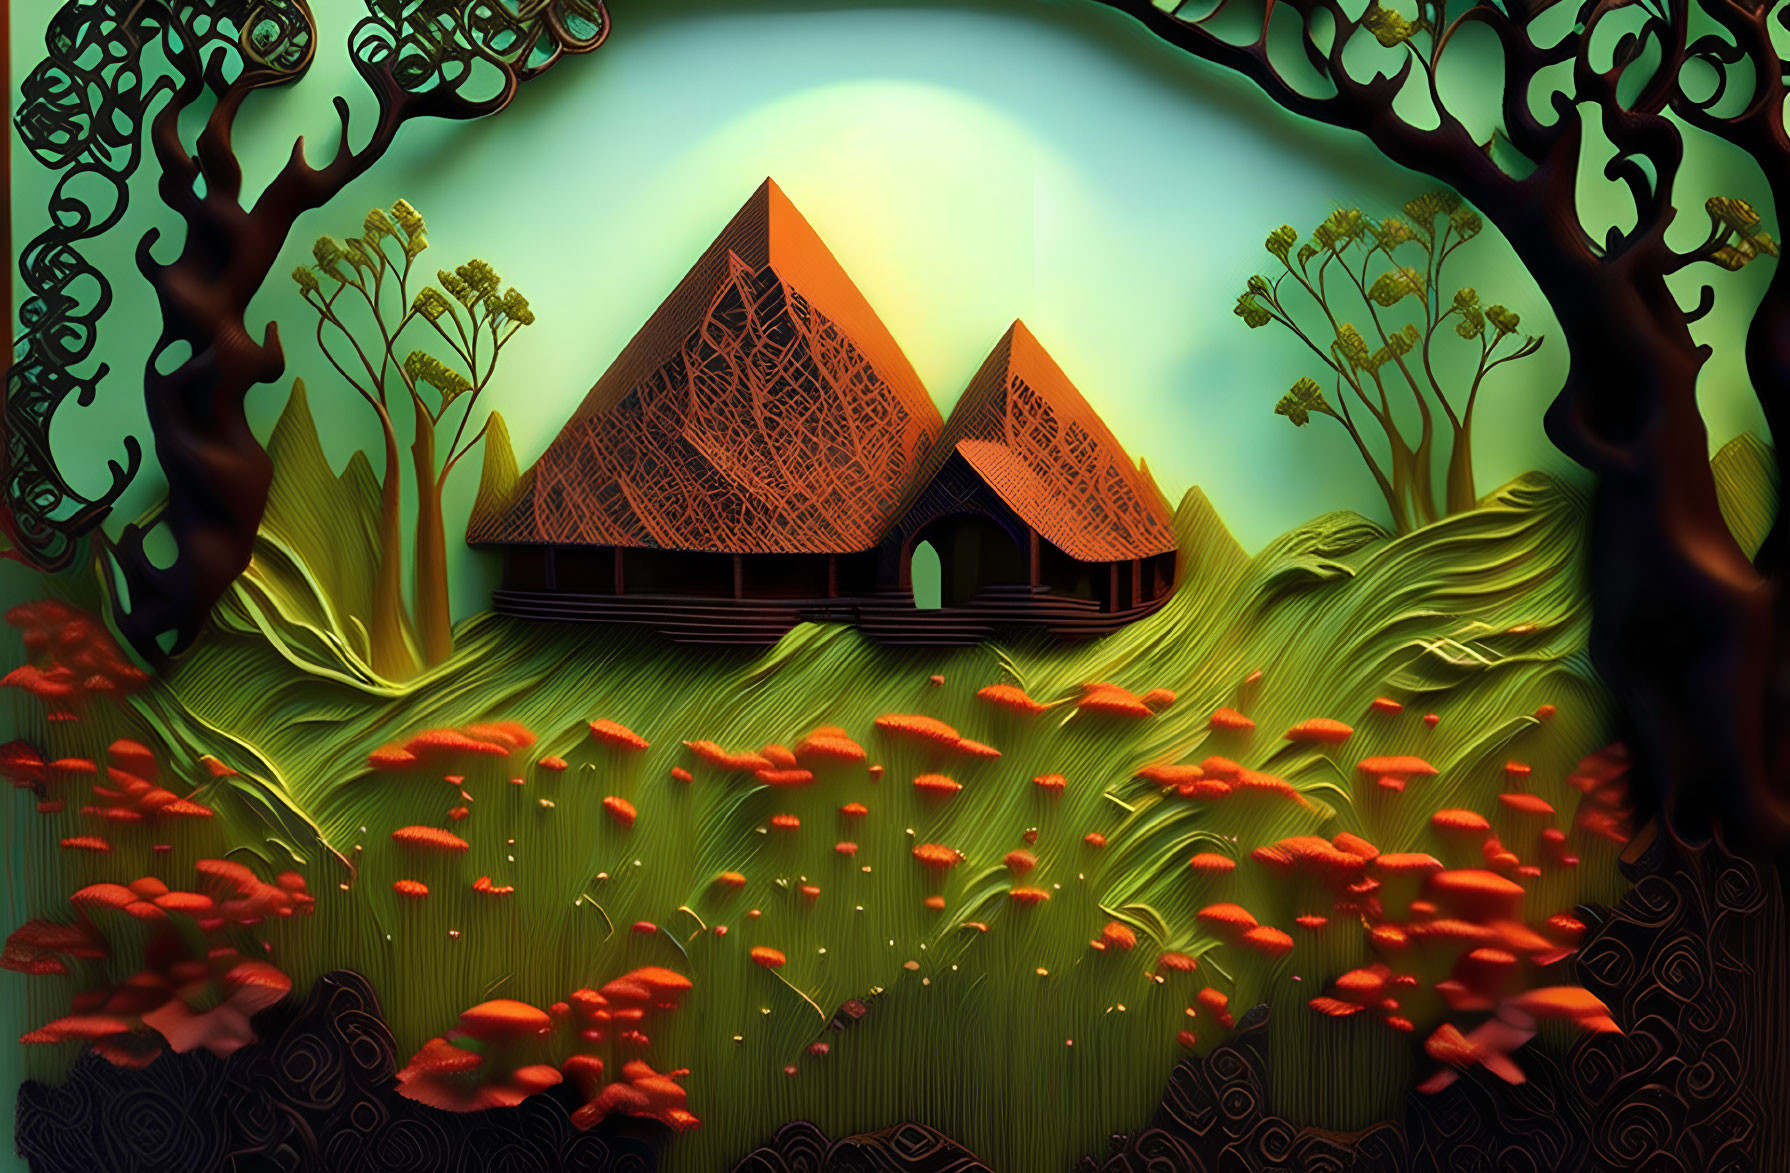 Digital art: Two huts on green landscape with orange mushrooms and silhouette trees on blue backdrop